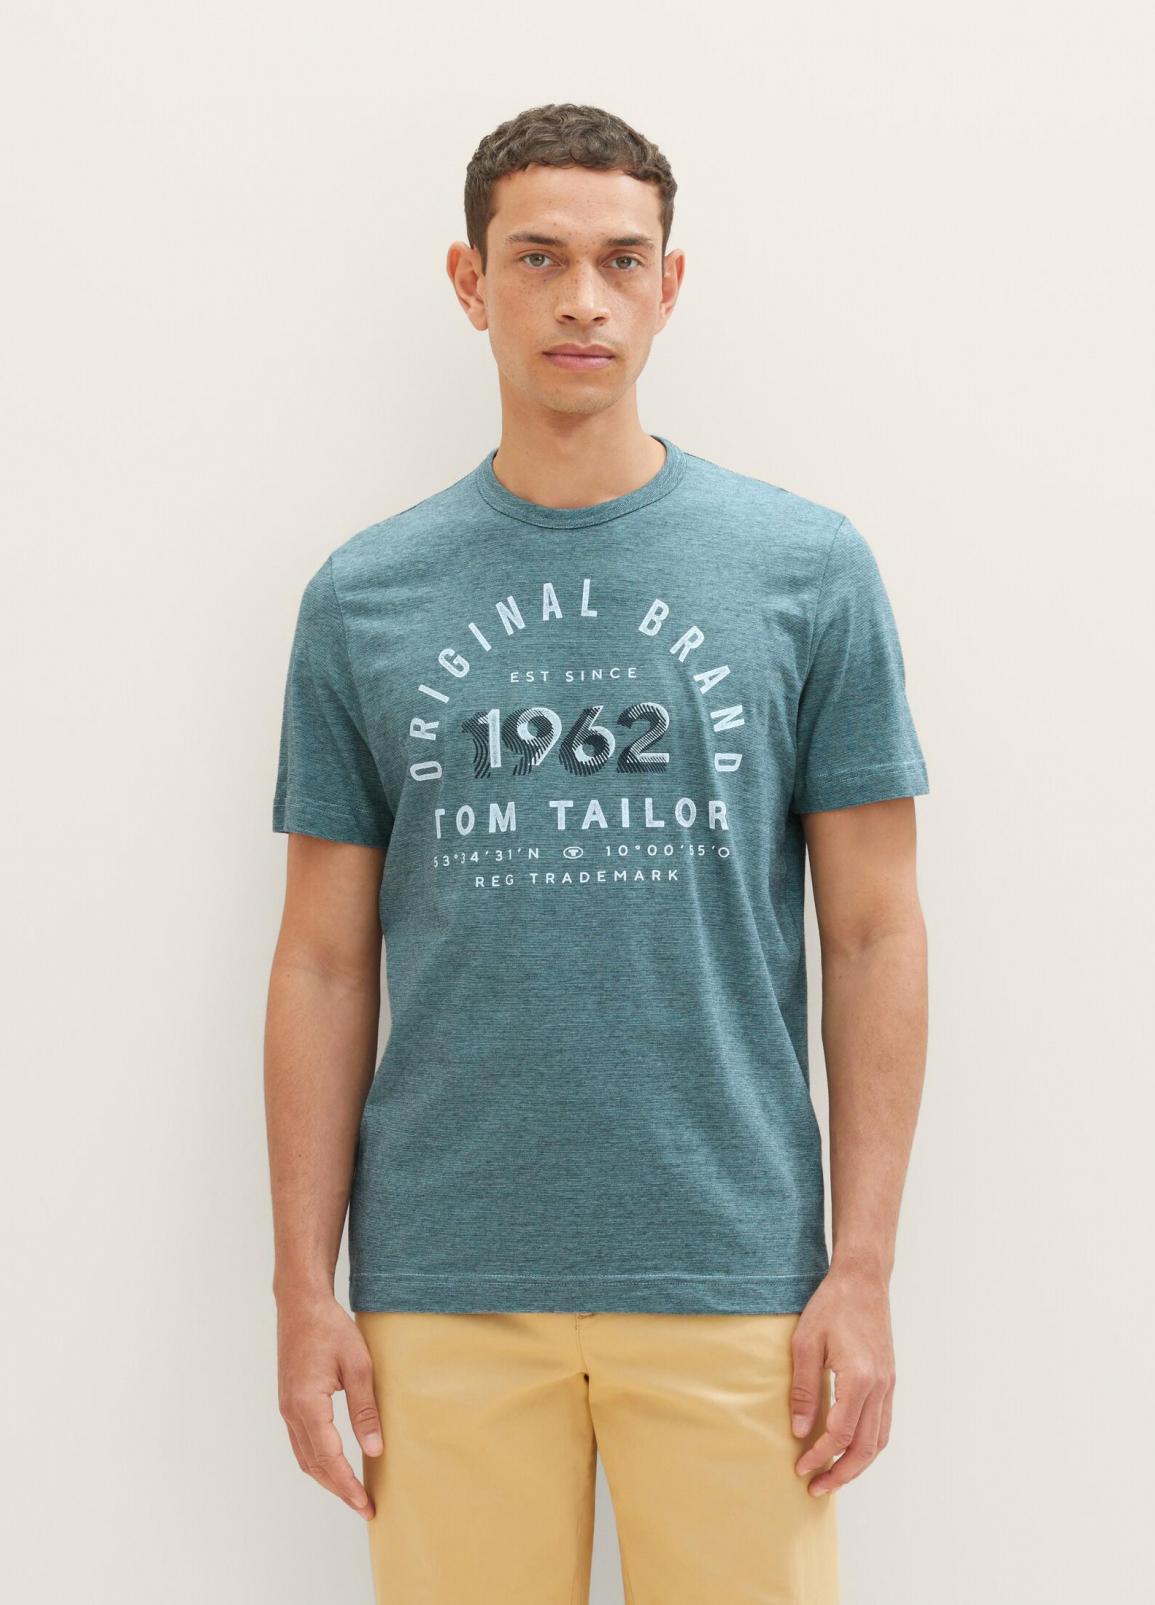 Tom Tailor® T-shirt With A Print - Navy Blue Stone Fine Stripe